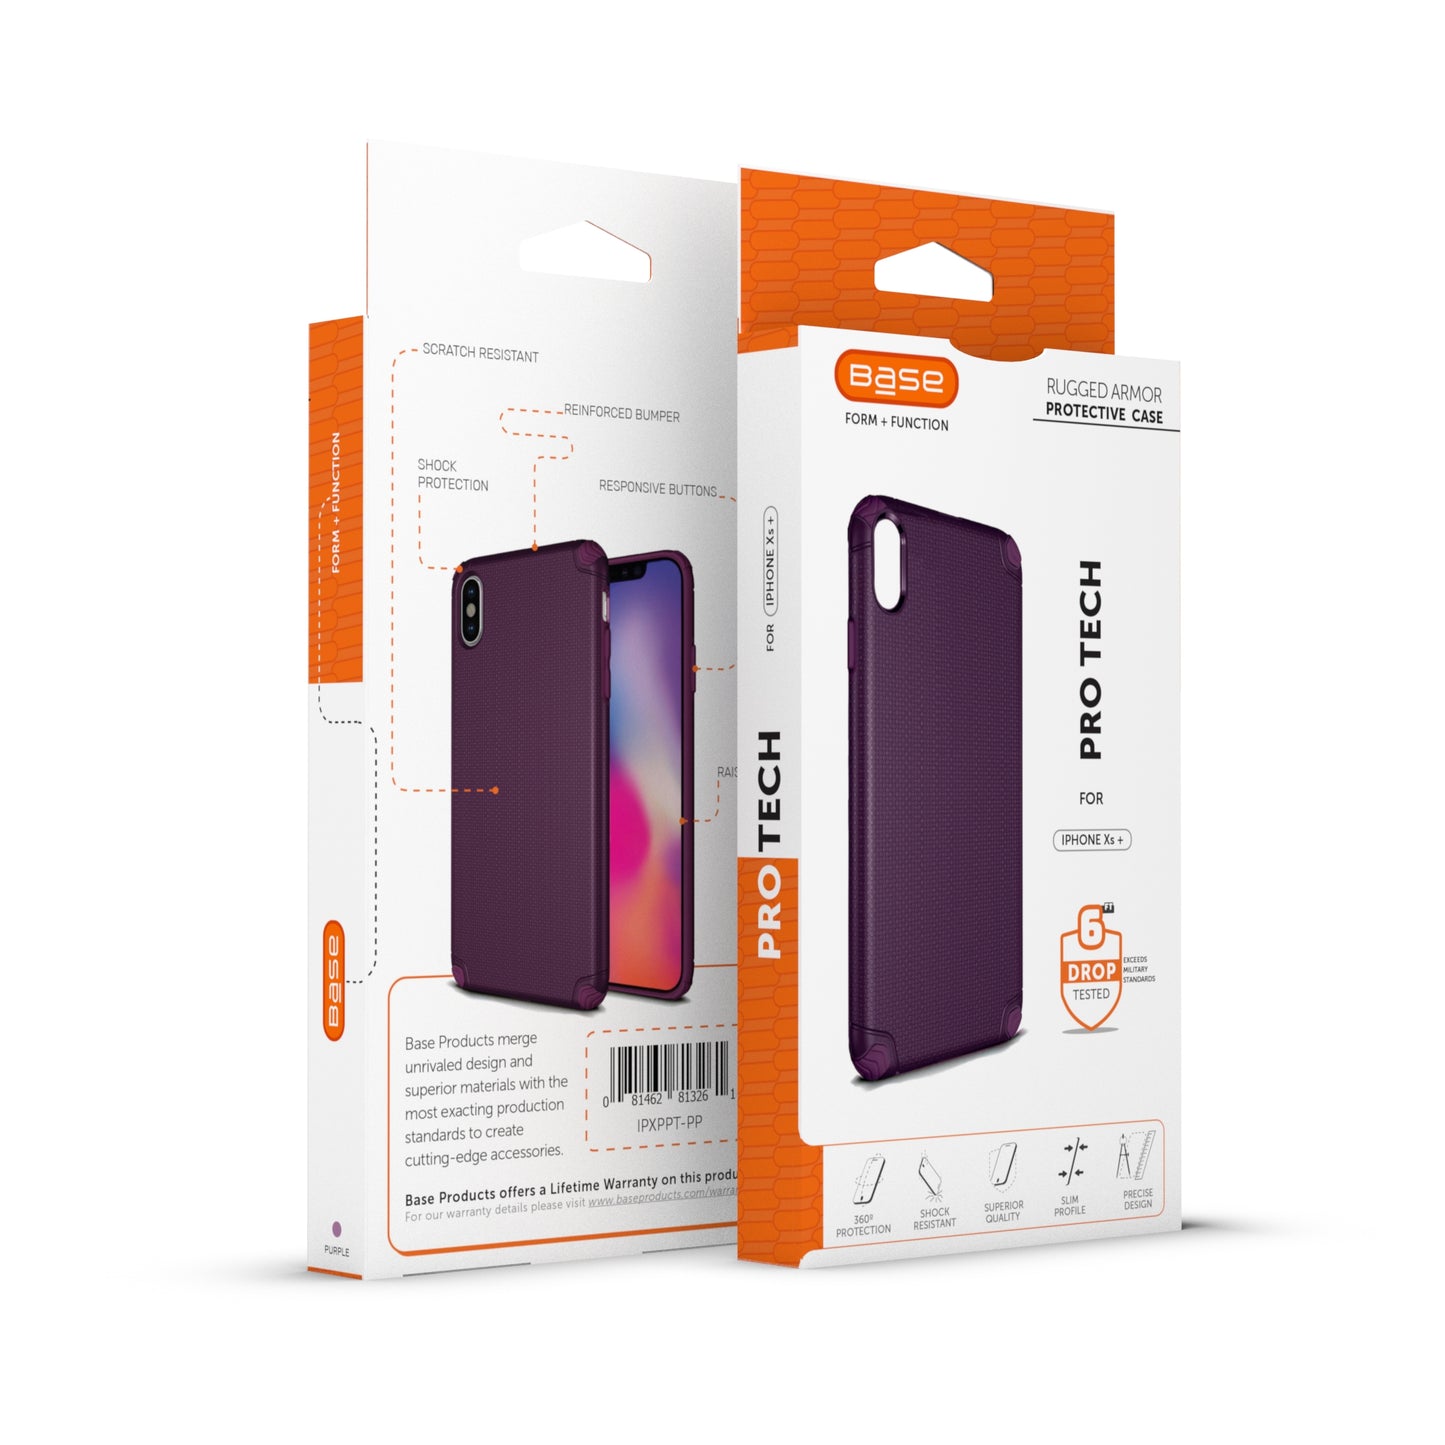 Base ProTech - Rugged Armor Protective Case for iPhone XR - Purple